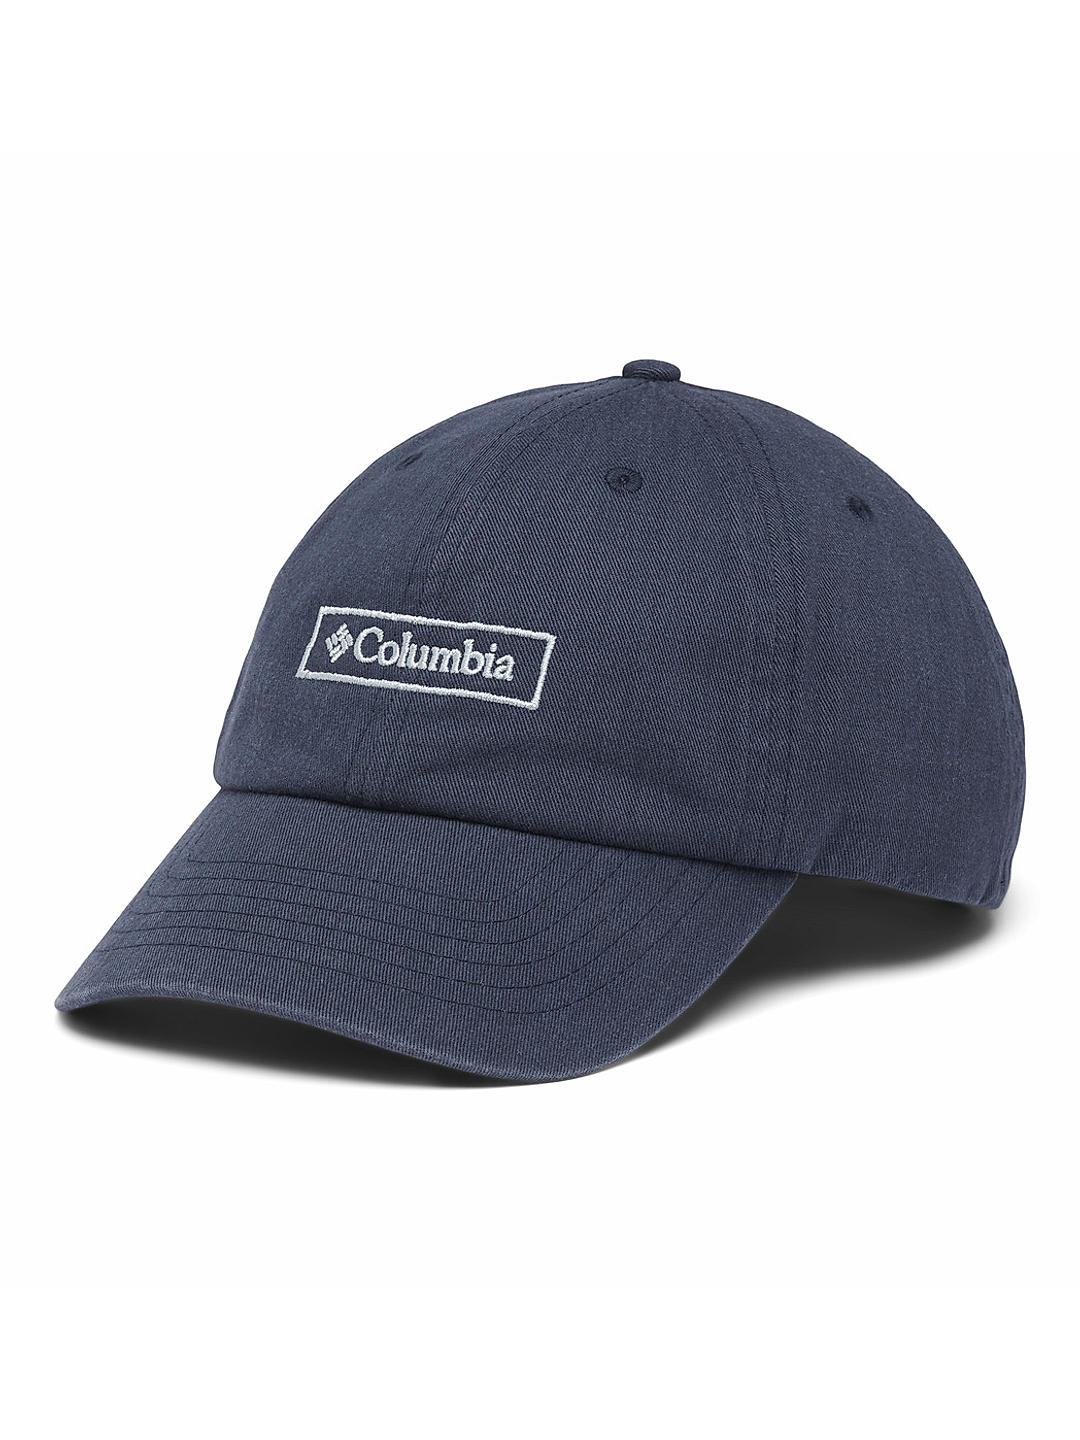 Buy Blue Columbia Logo Dad Cap for Men and Women Online at Columbia  Sportswear